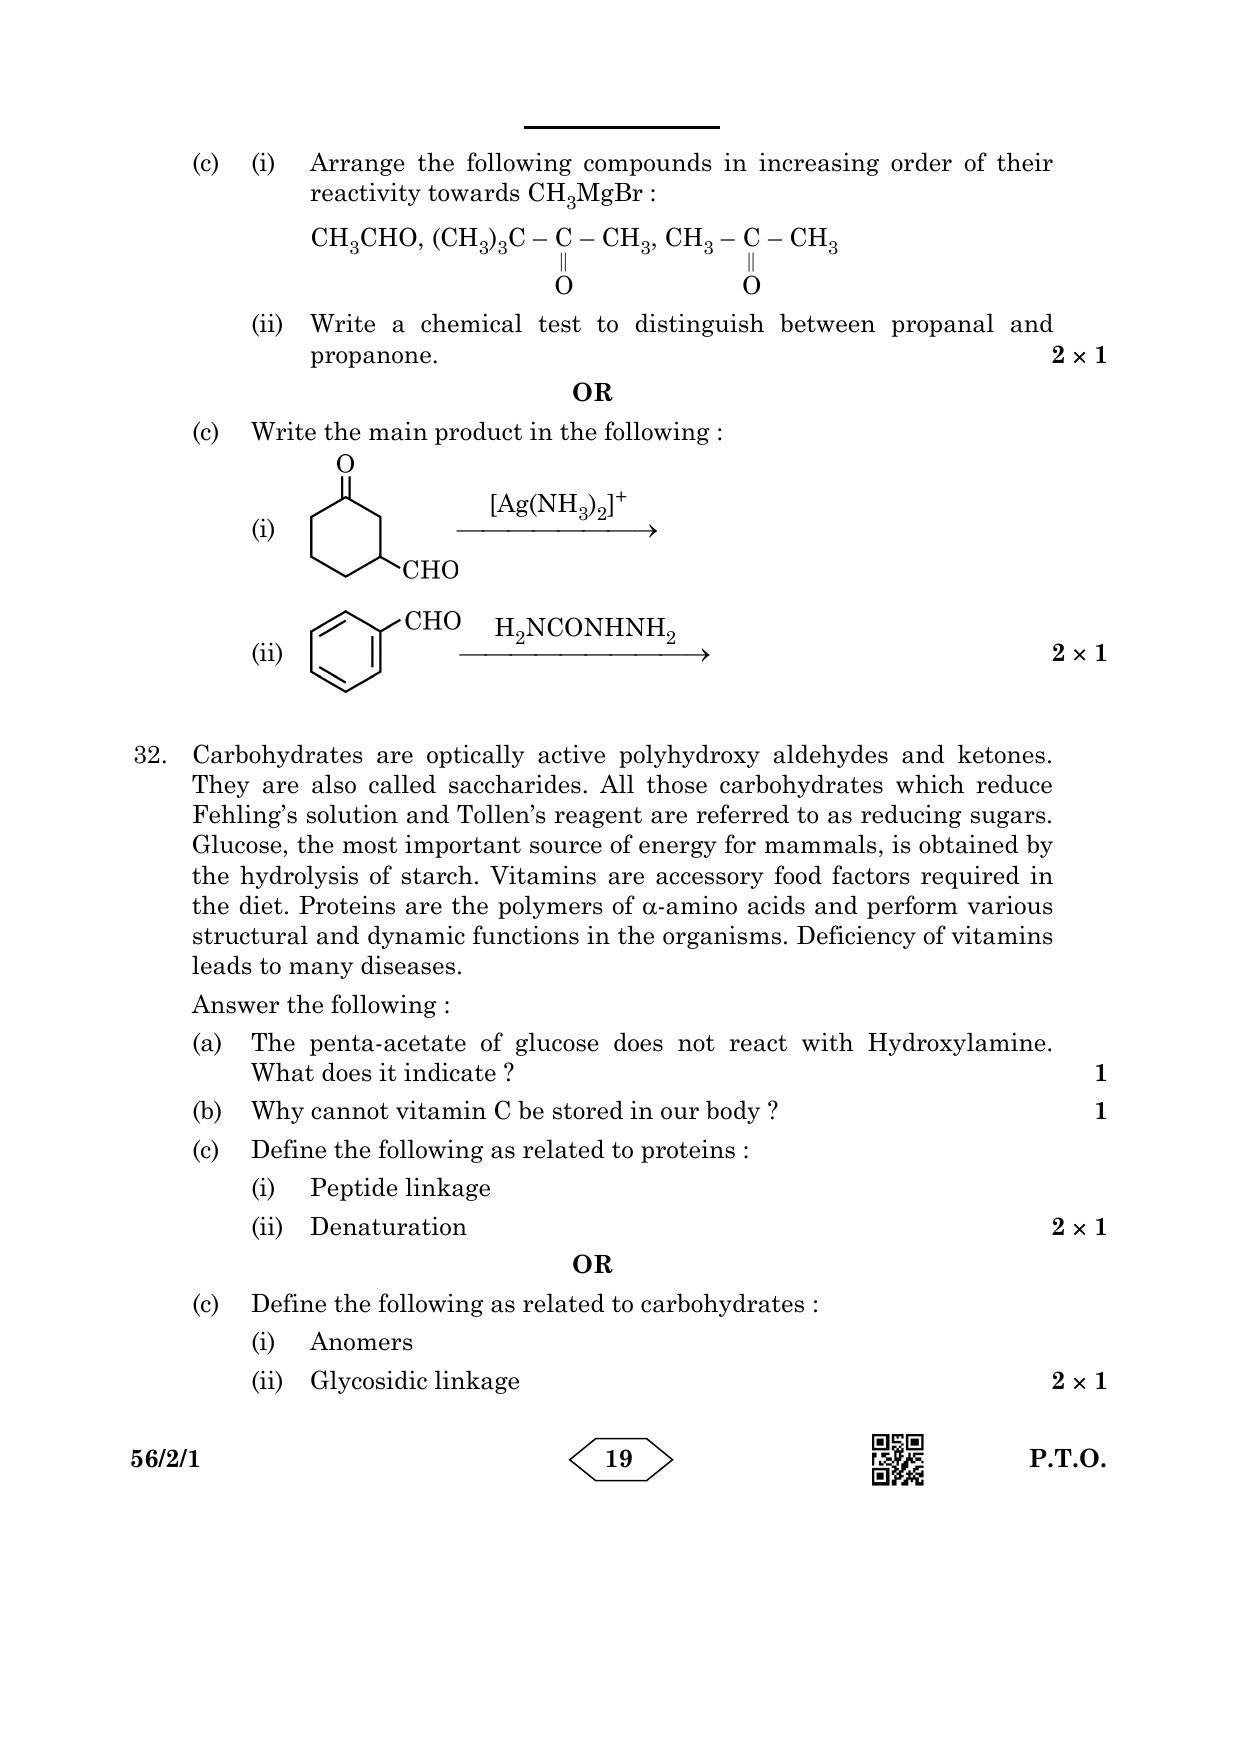 CBSE Class 12 56-2-1 Chemistry 2023 Question Paper - Page 19